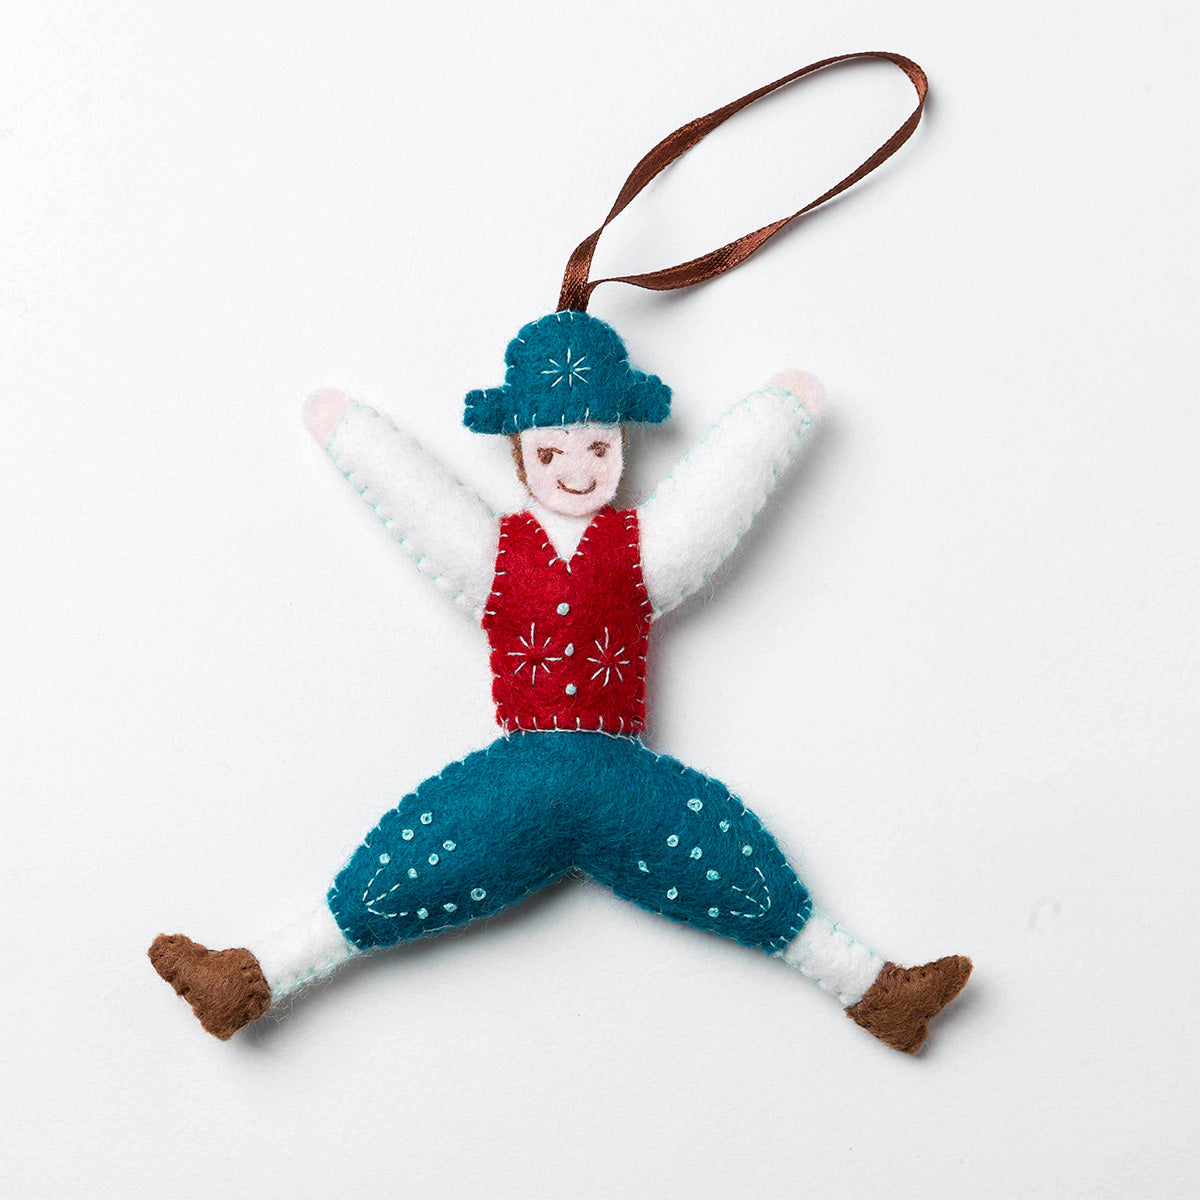 12 Days of Christmas Felt Ornament Kit - Lord-a-Leaping